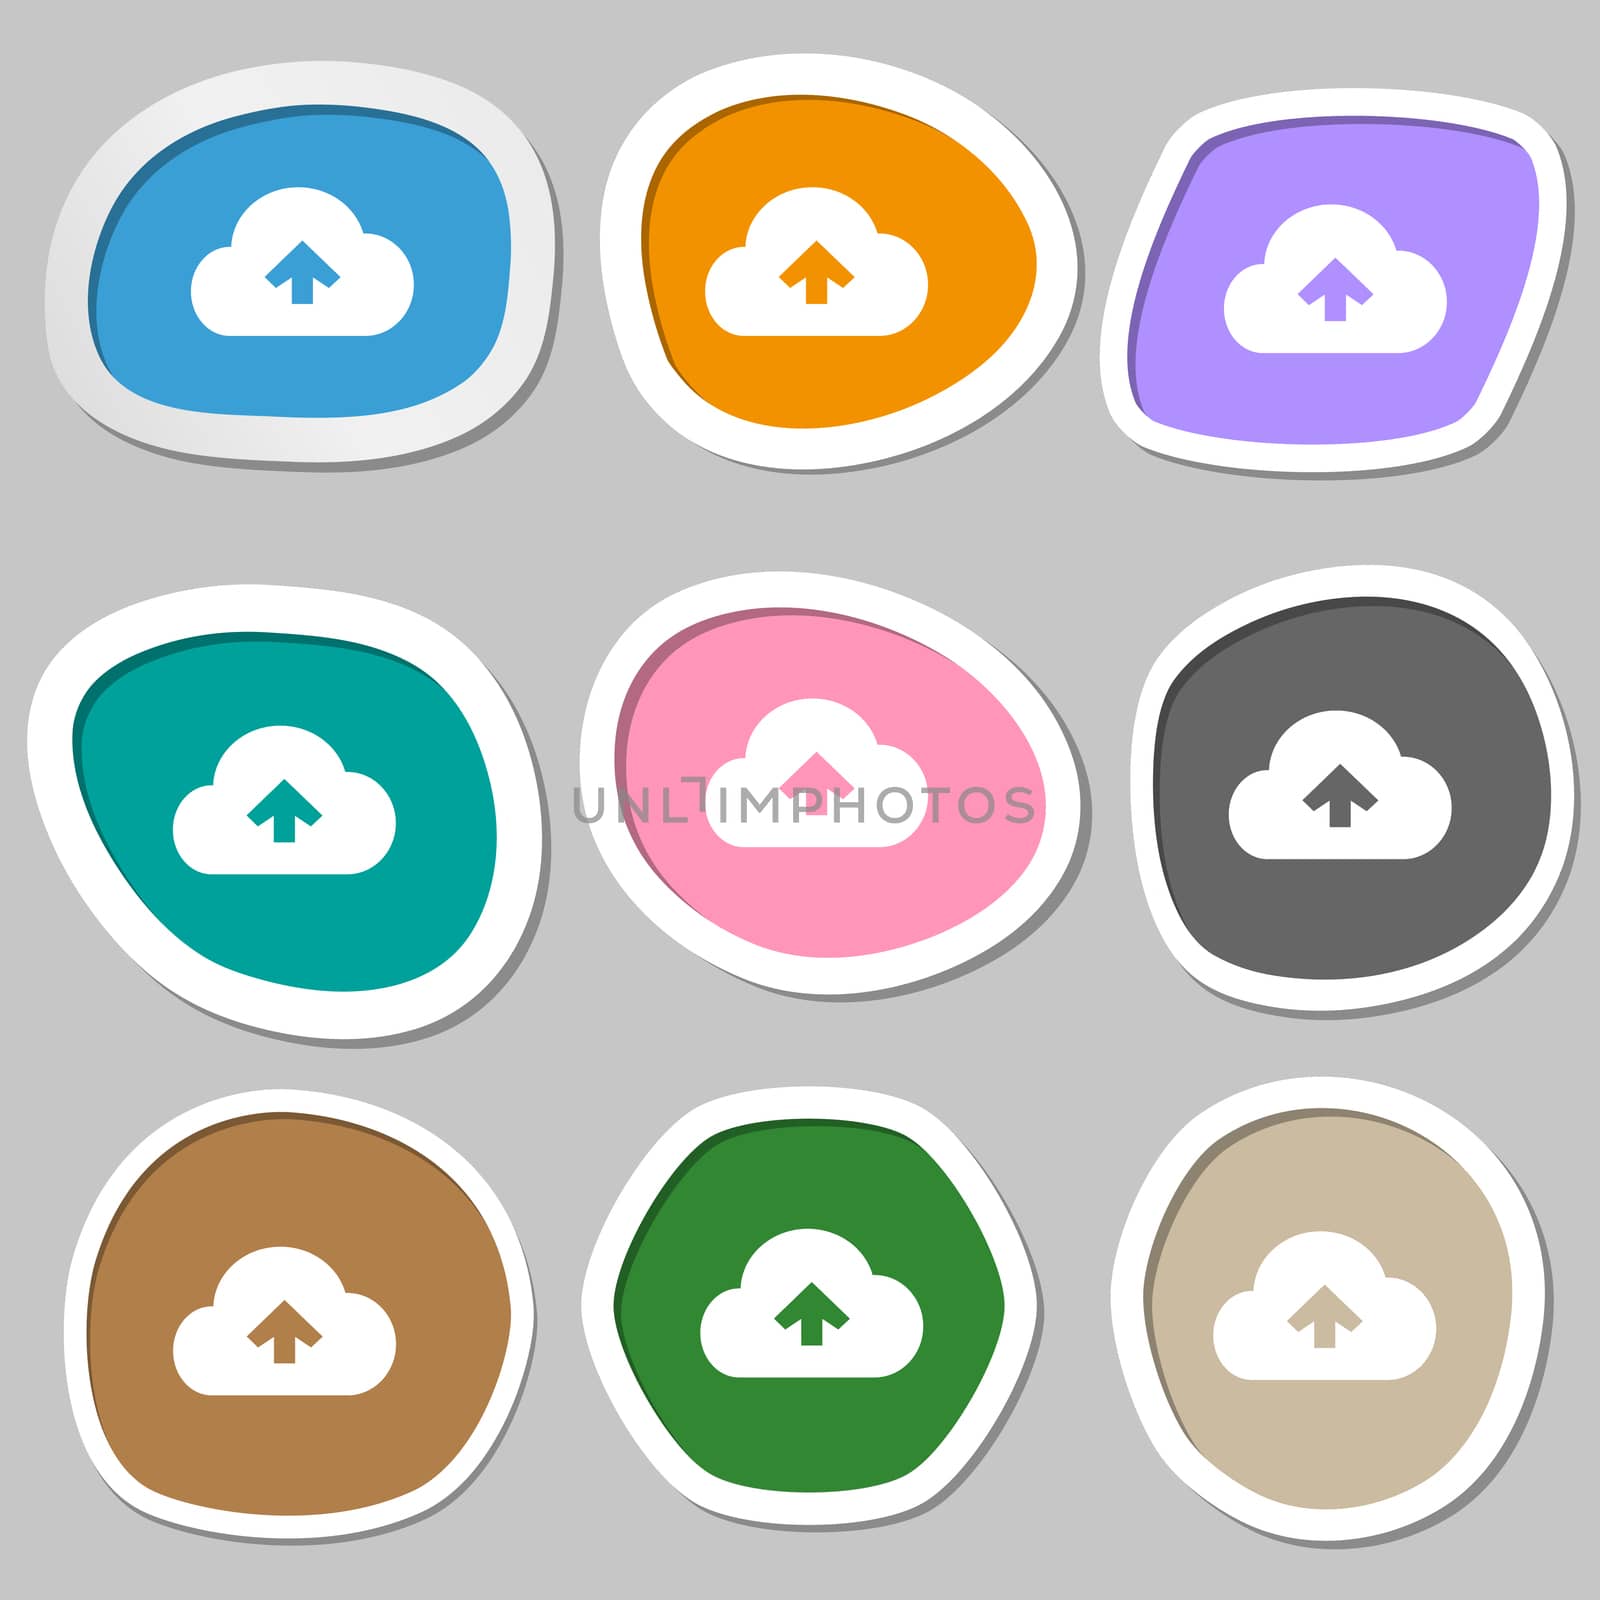 Upload from cloud icon symbols. Multicolored paper stickers. illustration